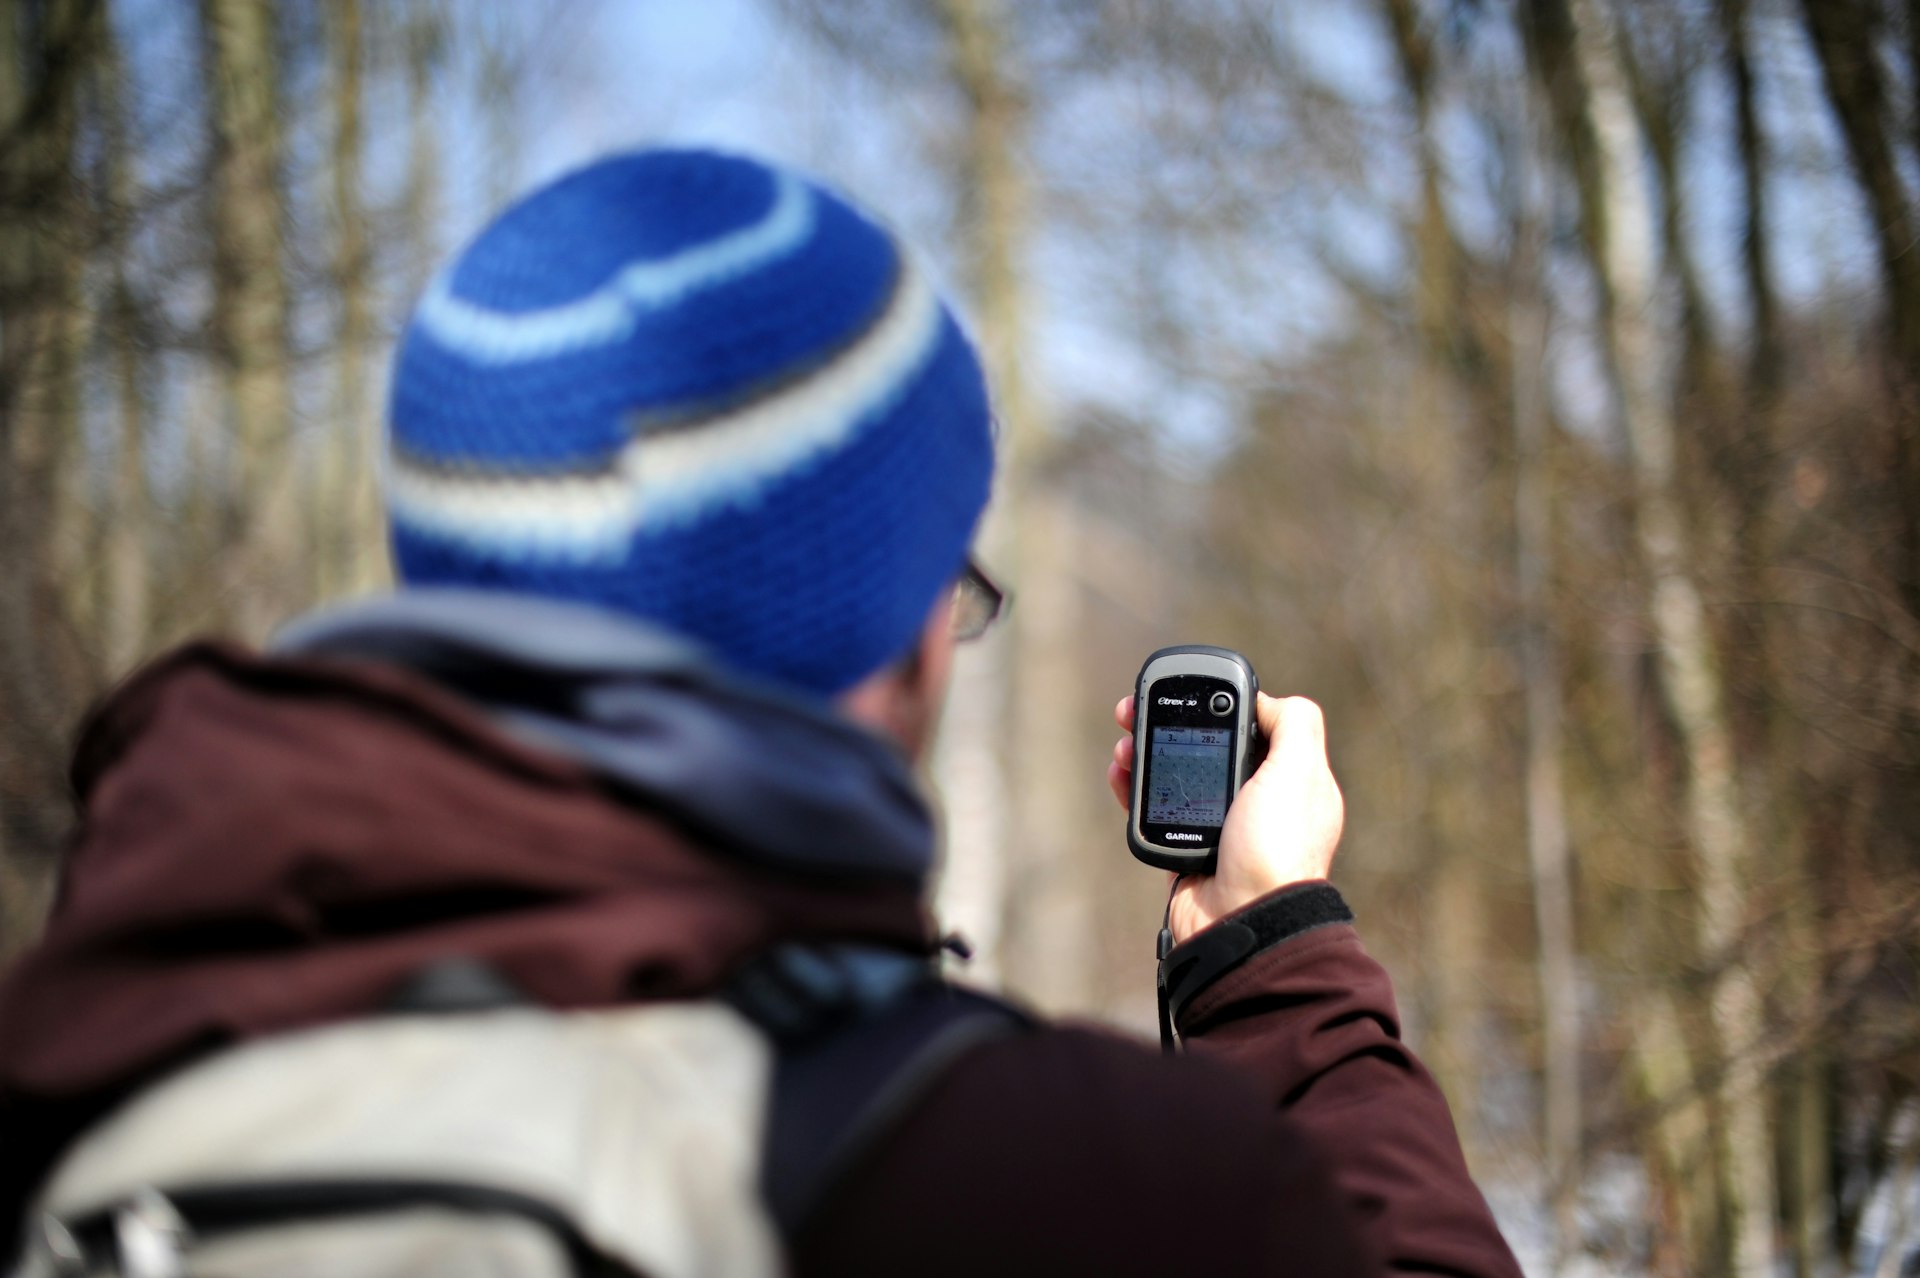 A man in a hat is geocaching, holding up his phone